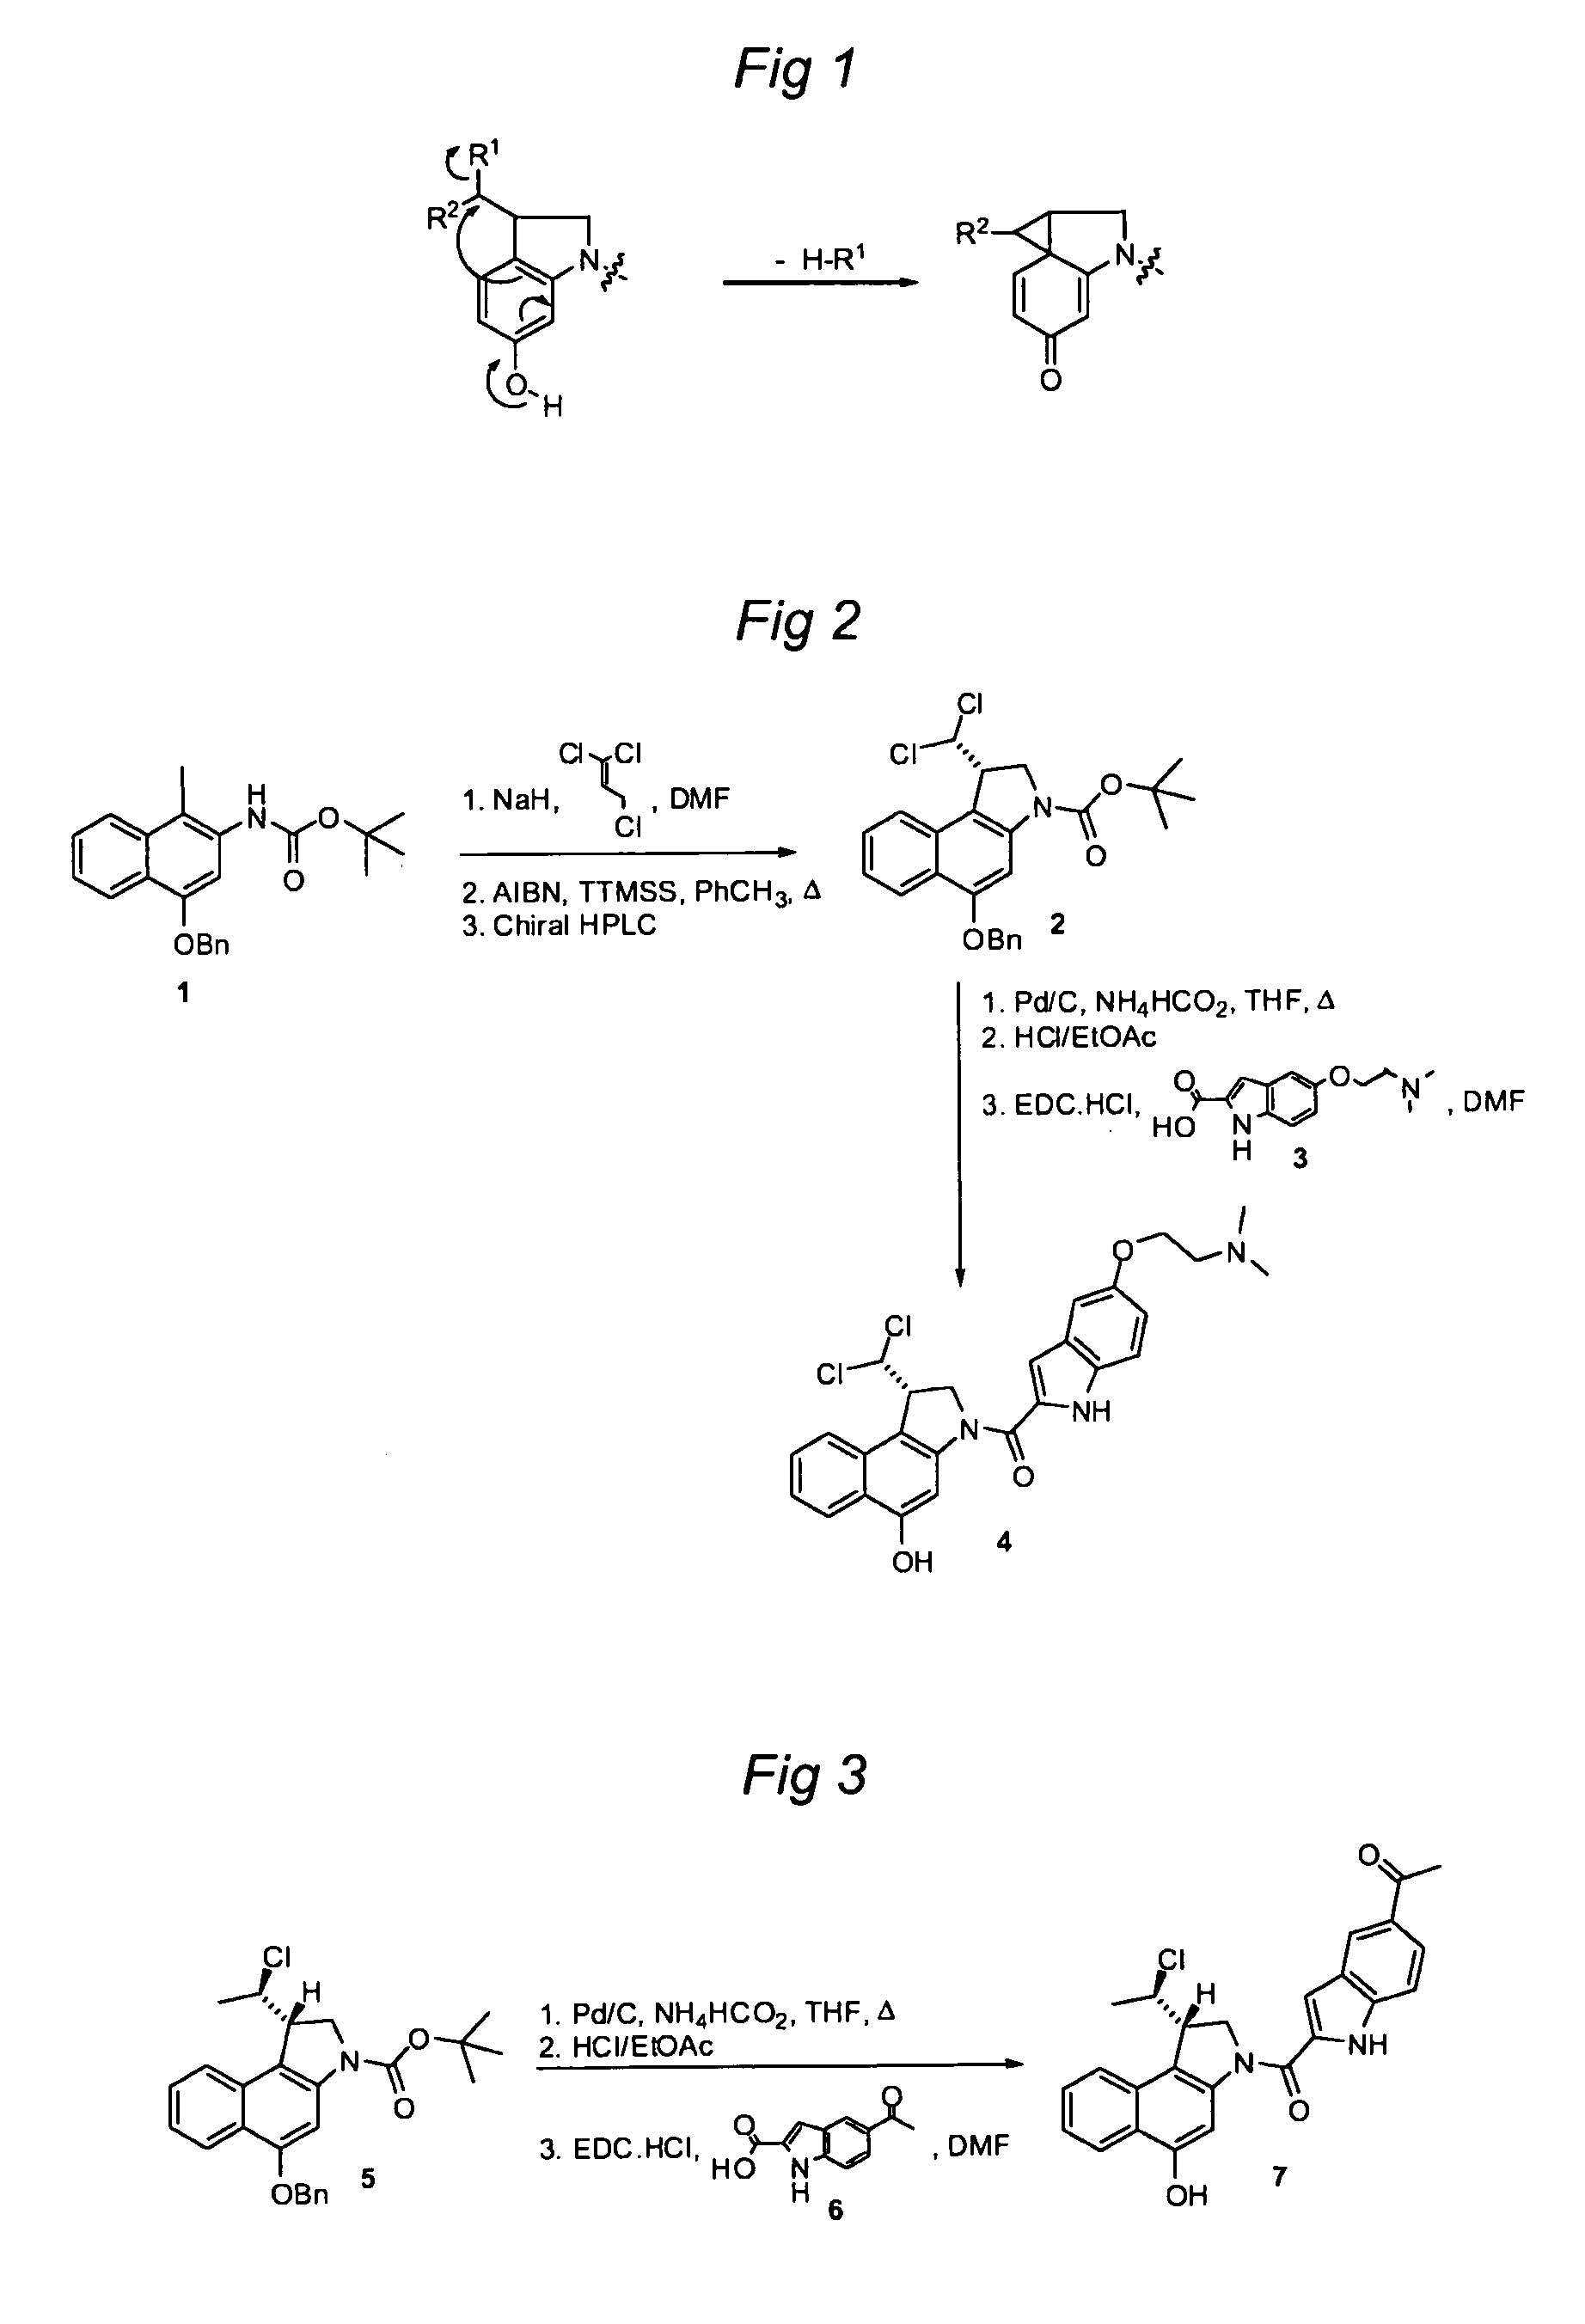 Substituted CC-1065 analogs and their conjugates